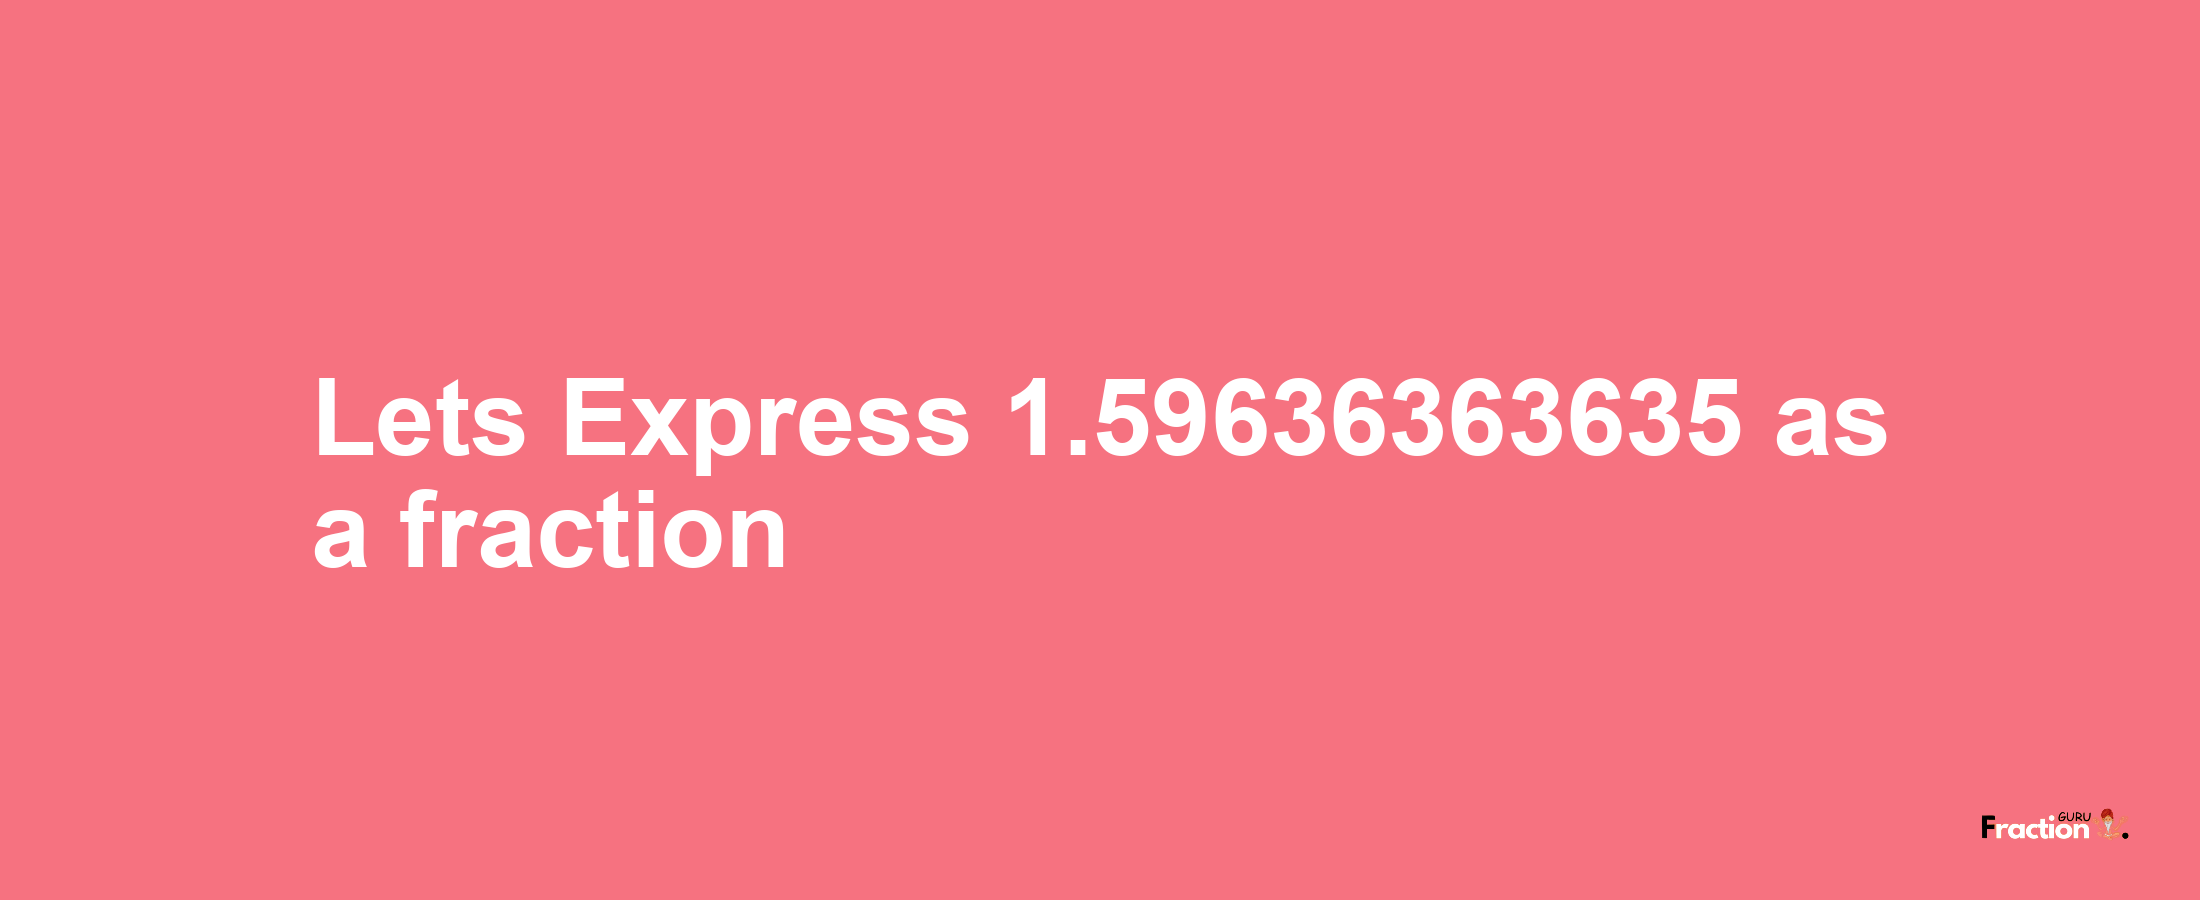 Lets Express 1.59636363635 as afraction